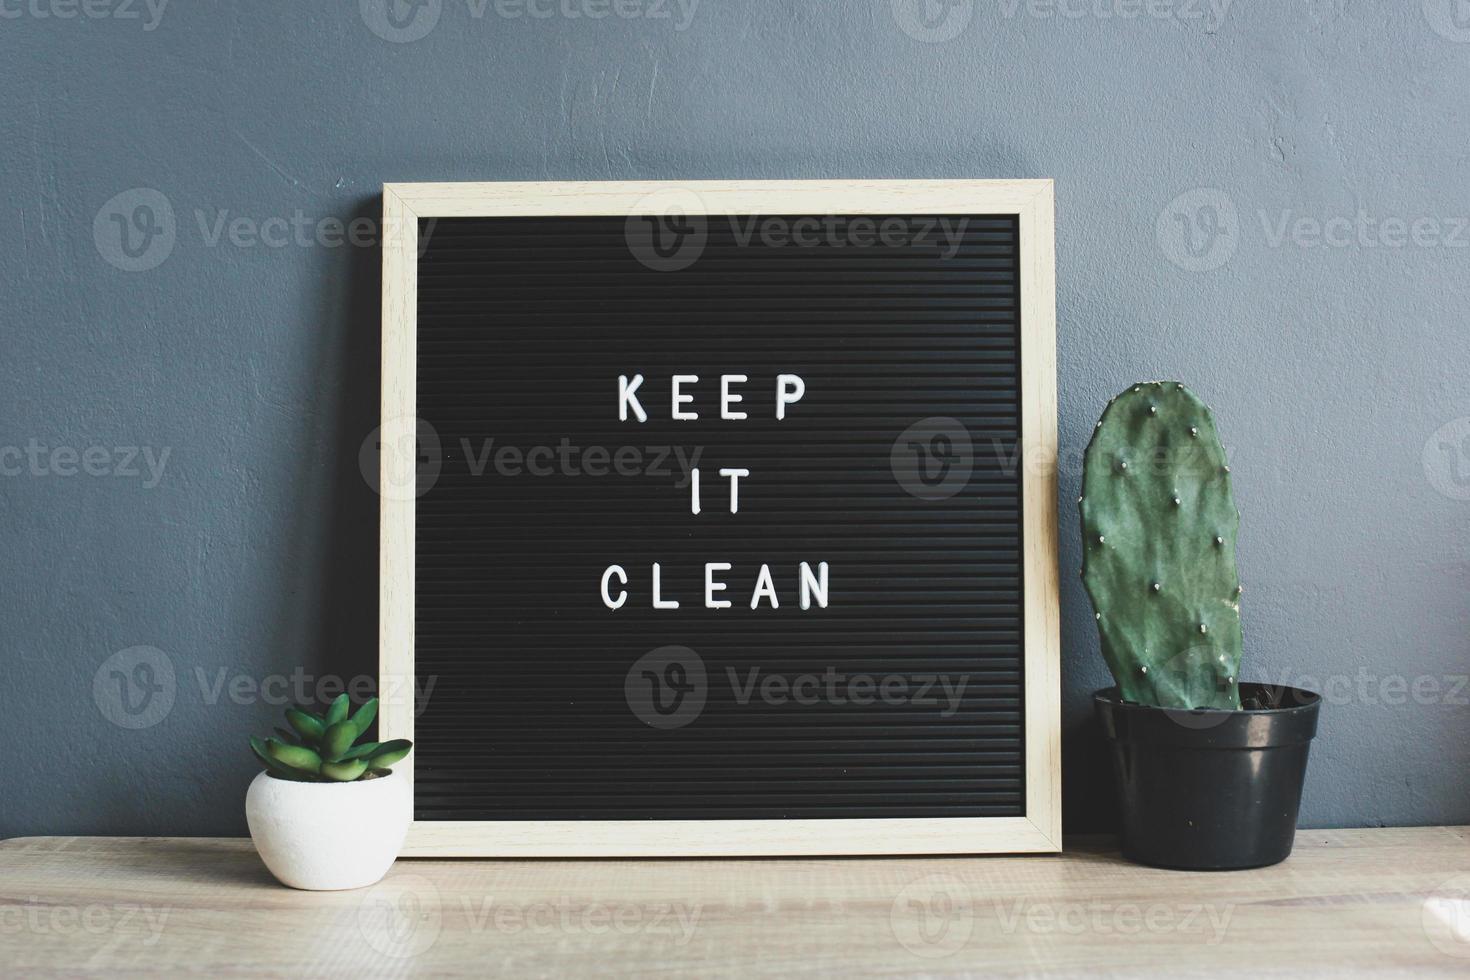 KEEP IT CLEAN quote on blackboard with cactus and succulent on wooden table photo